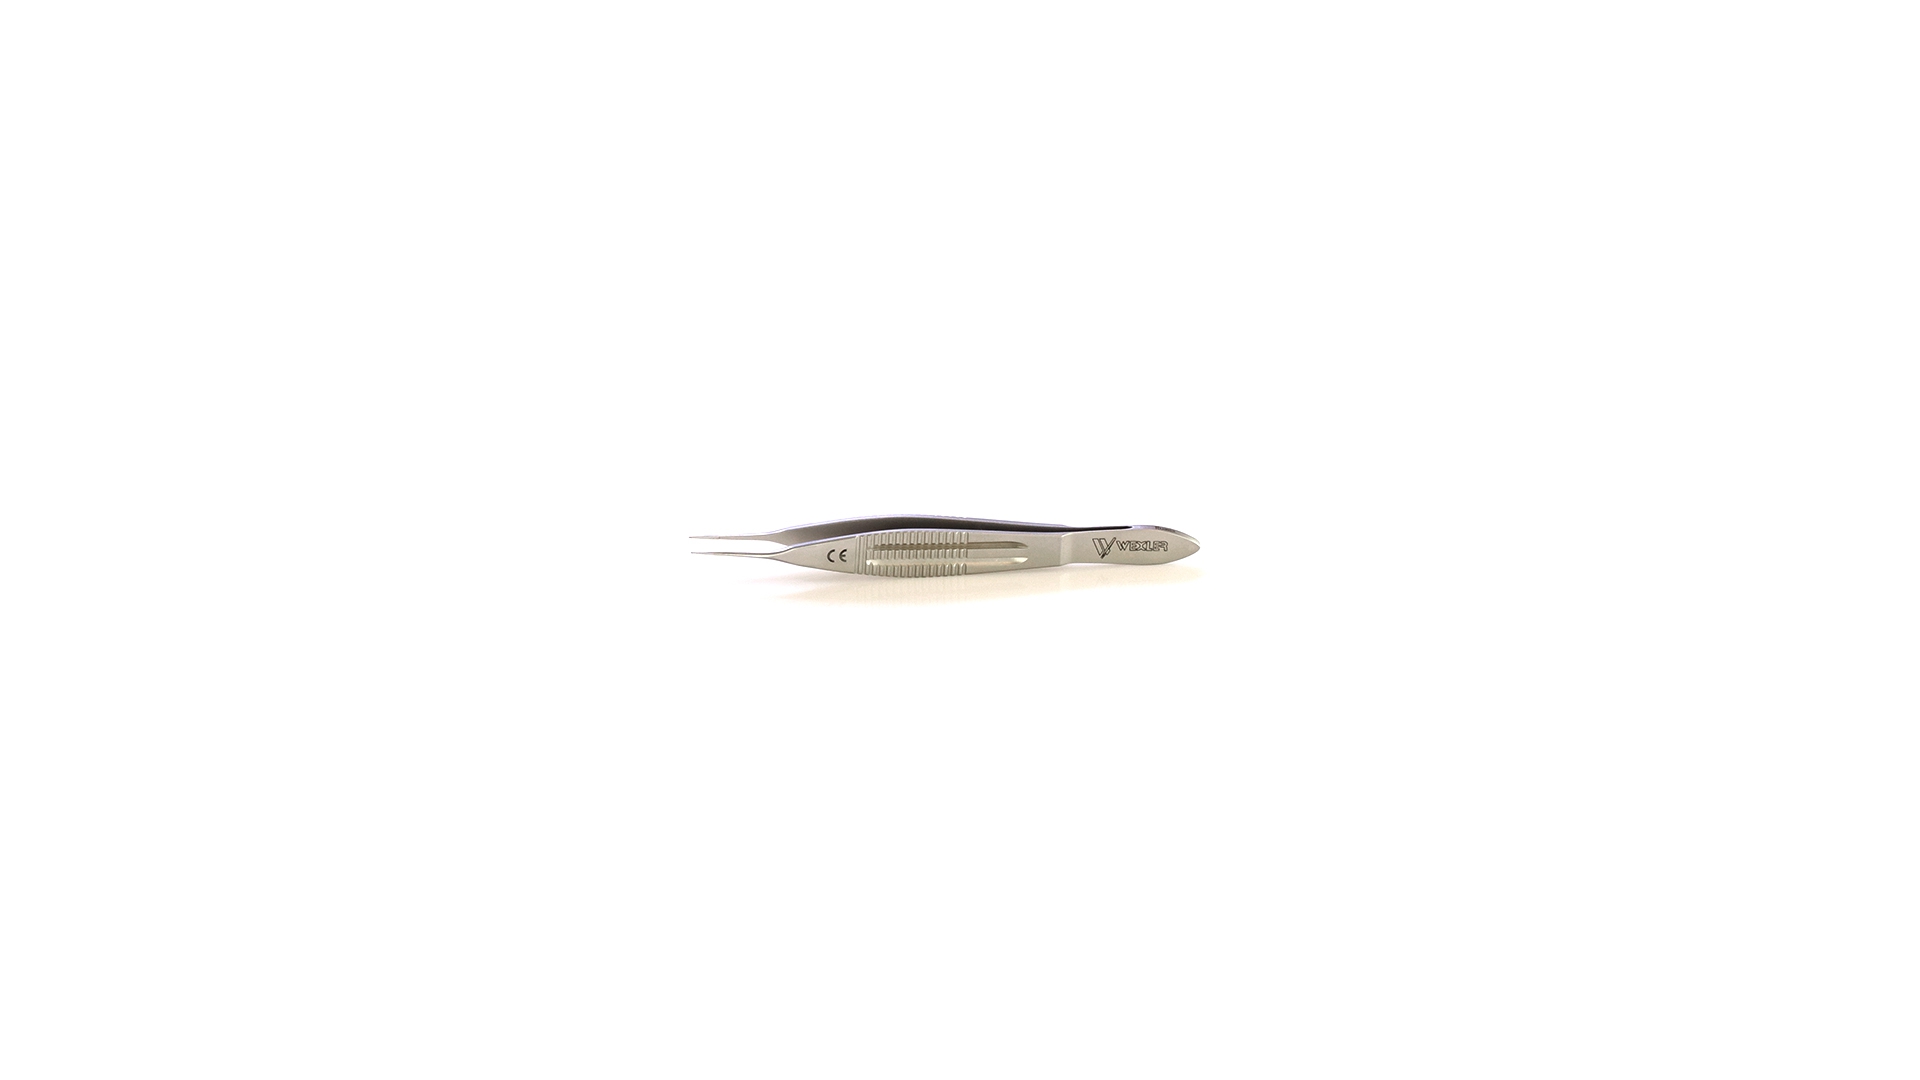 Castroviejo Suture Forceps - Straight tips